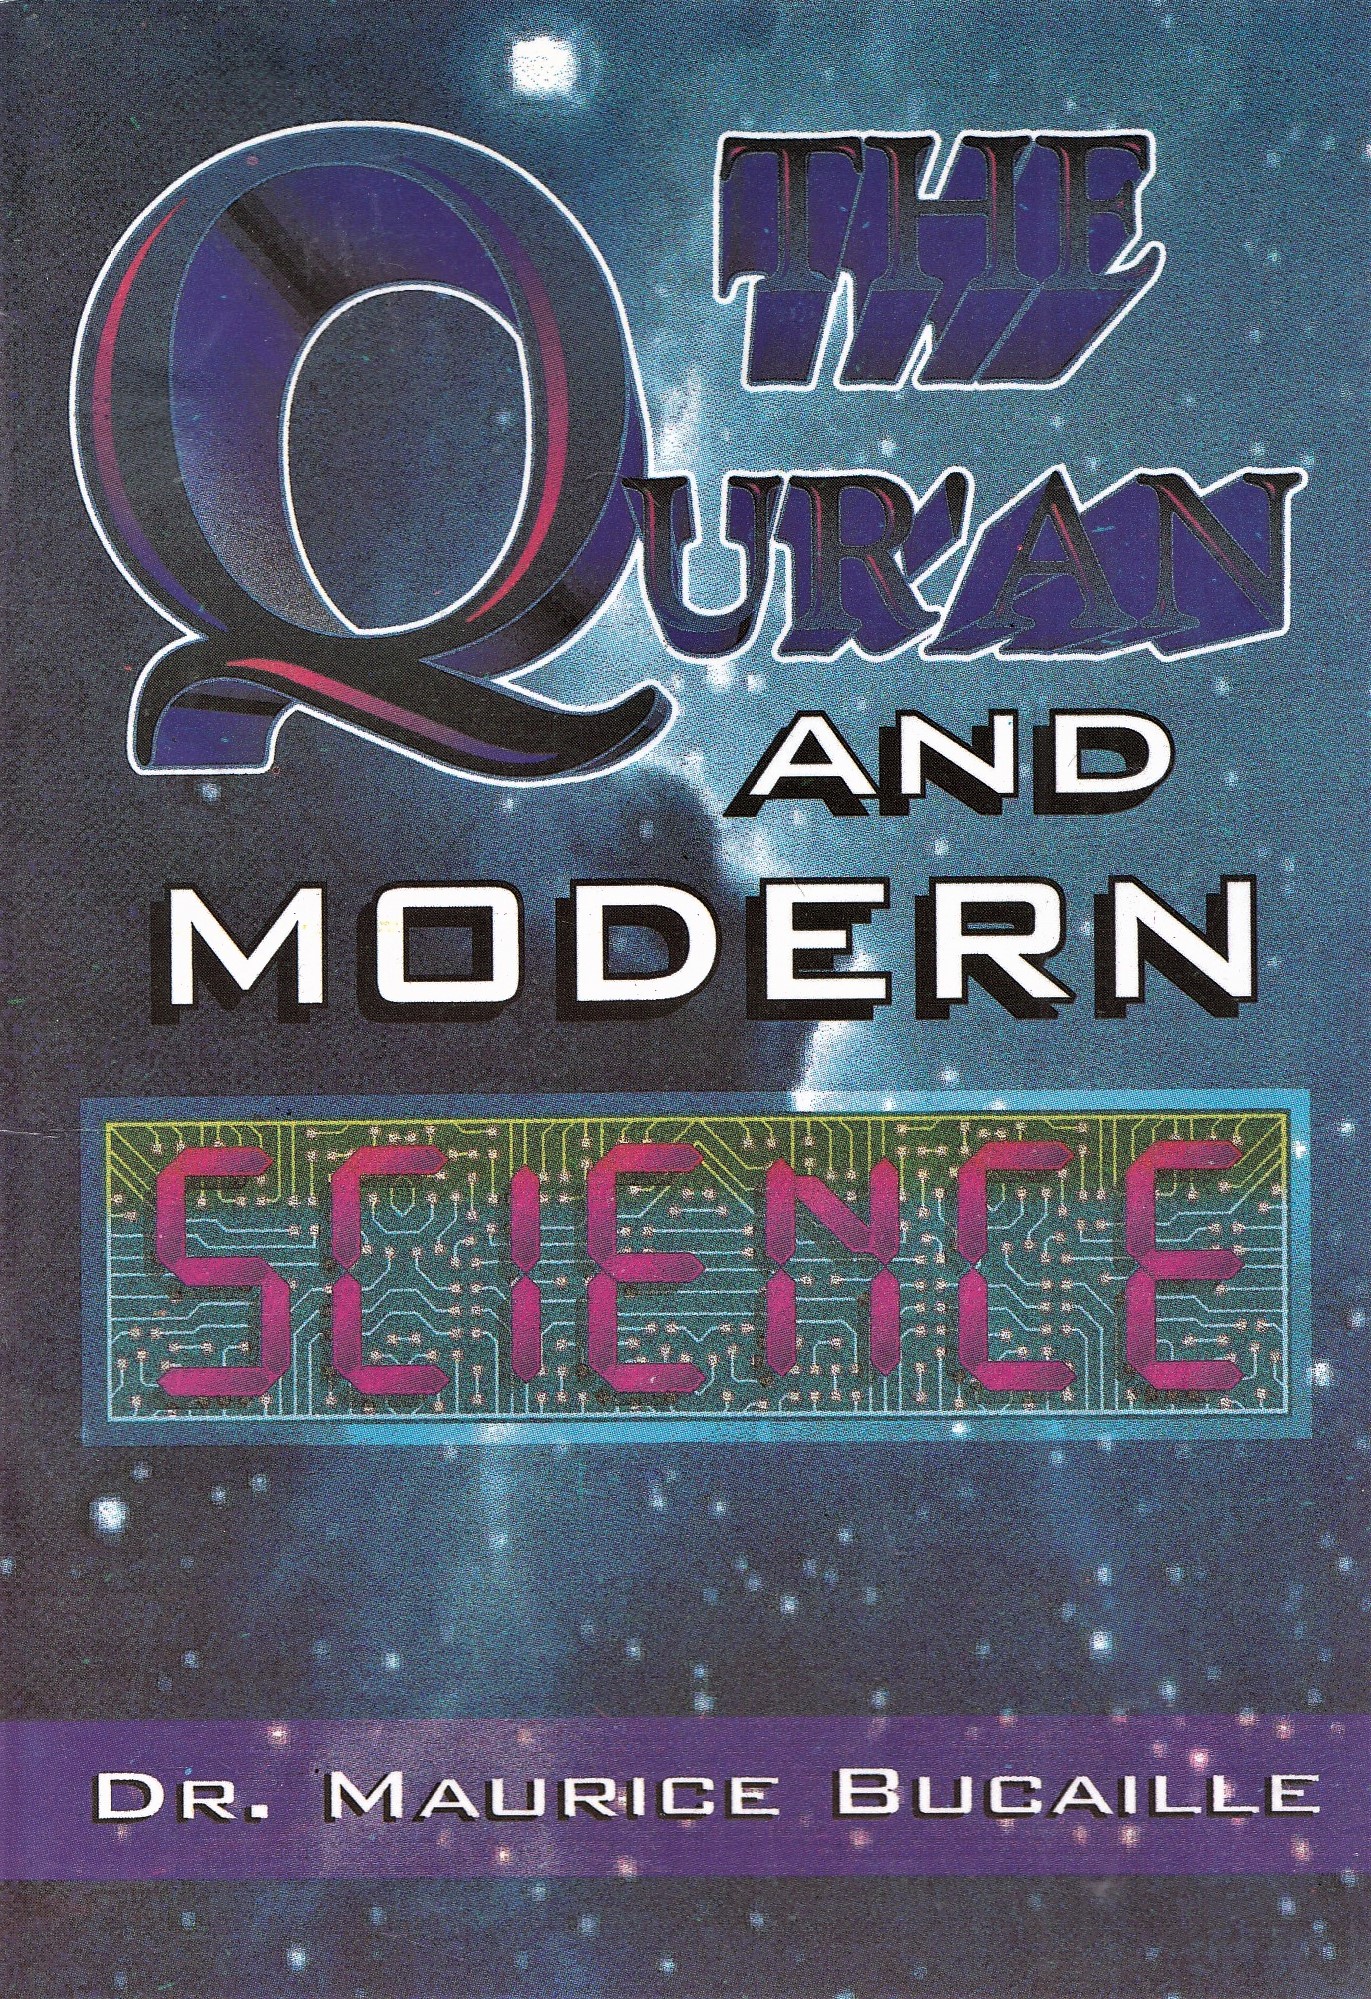 essay on islam and modern science 300 words